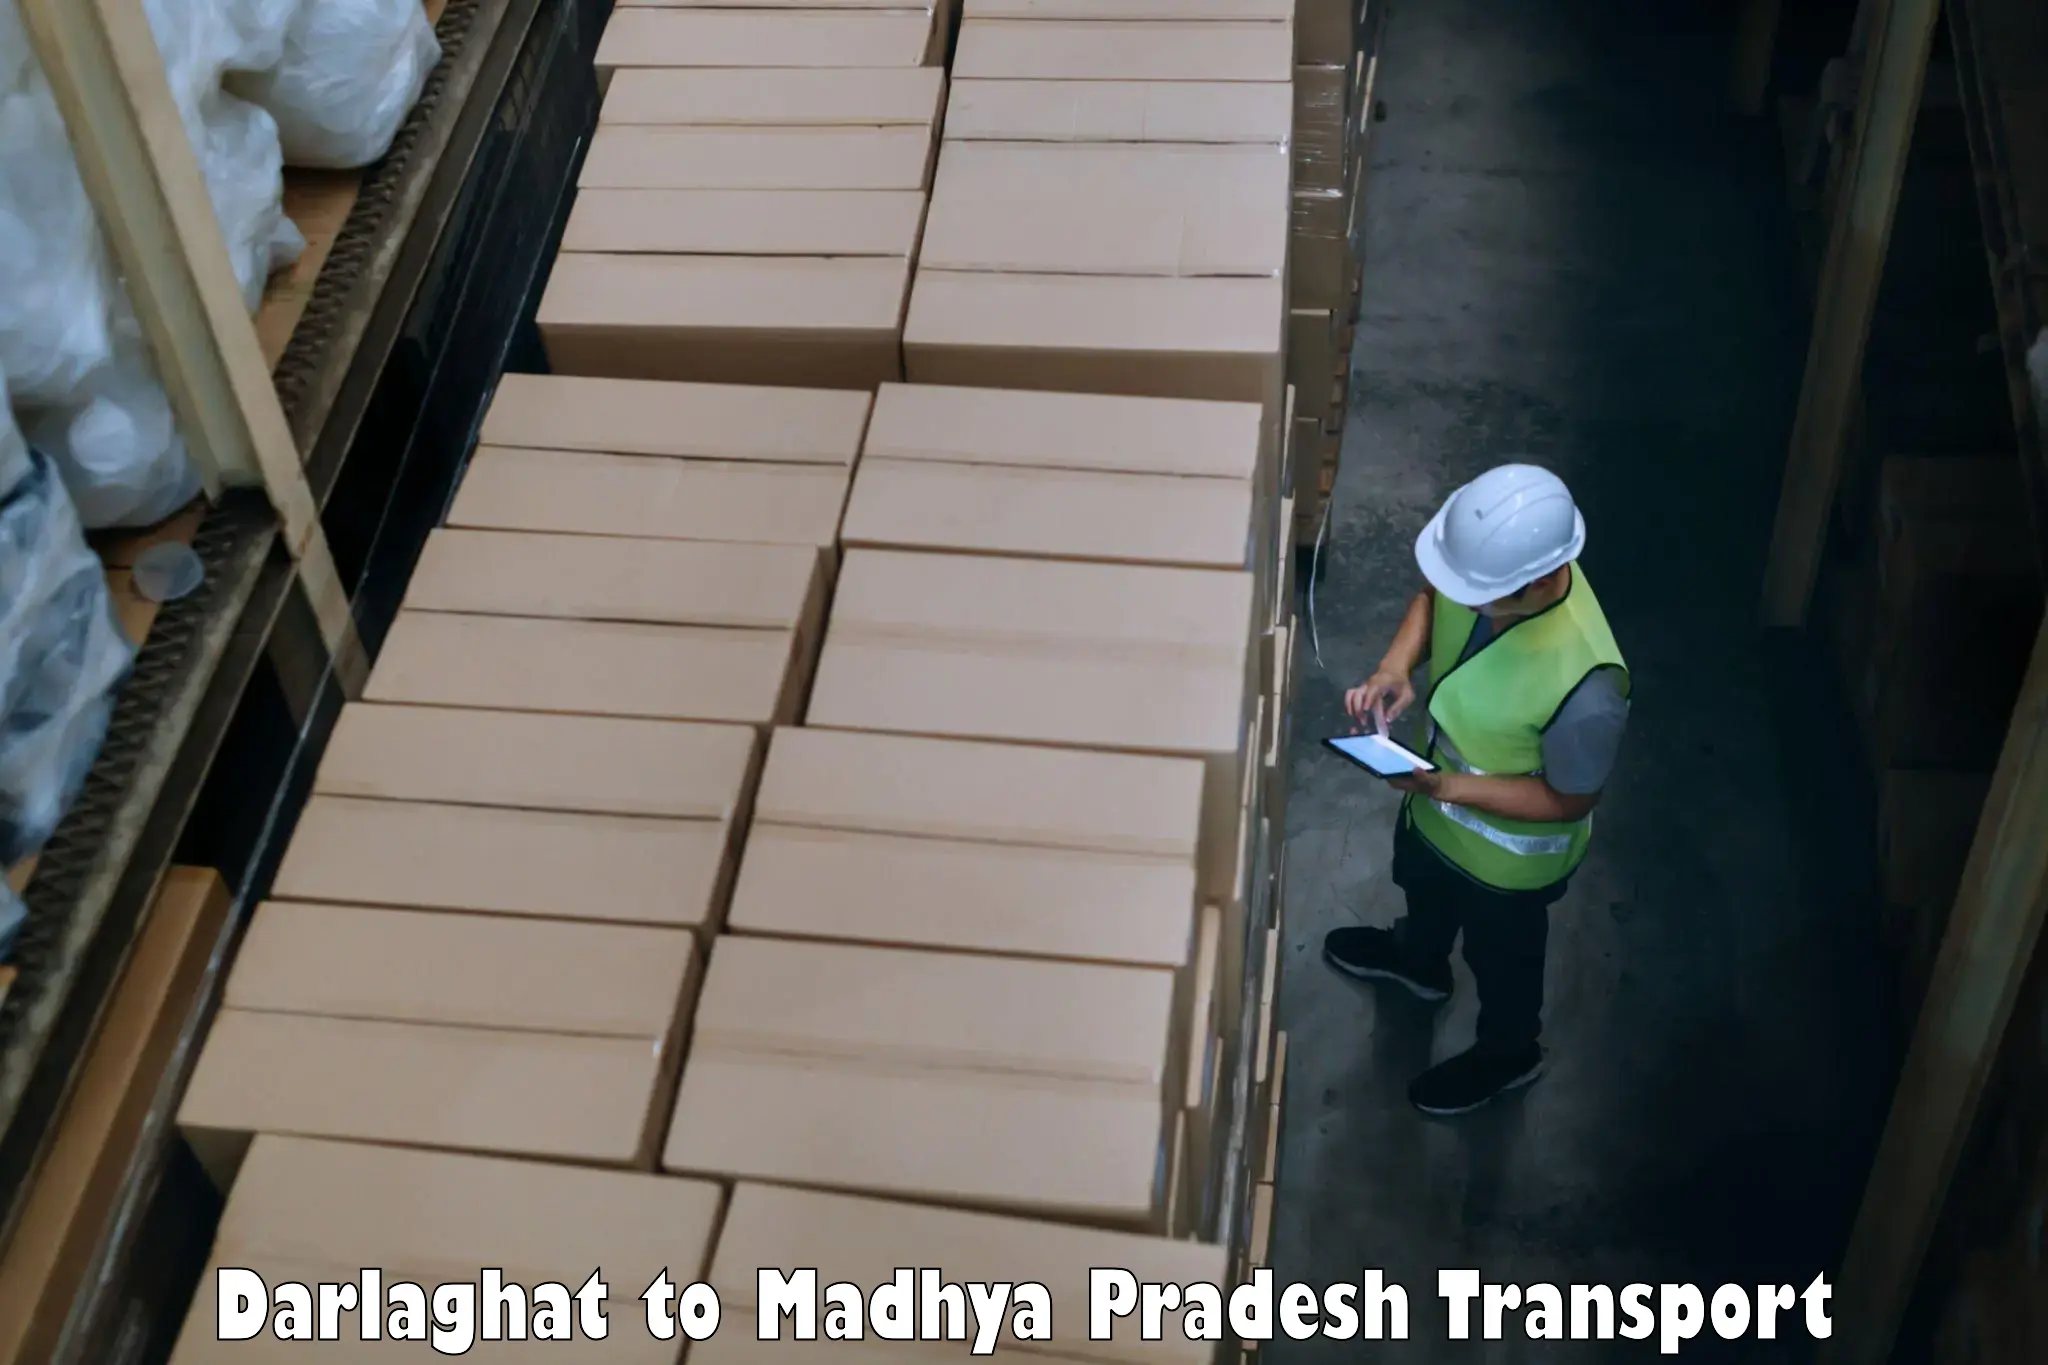 Air cargo transport services in Darlaghat to Chhindwara